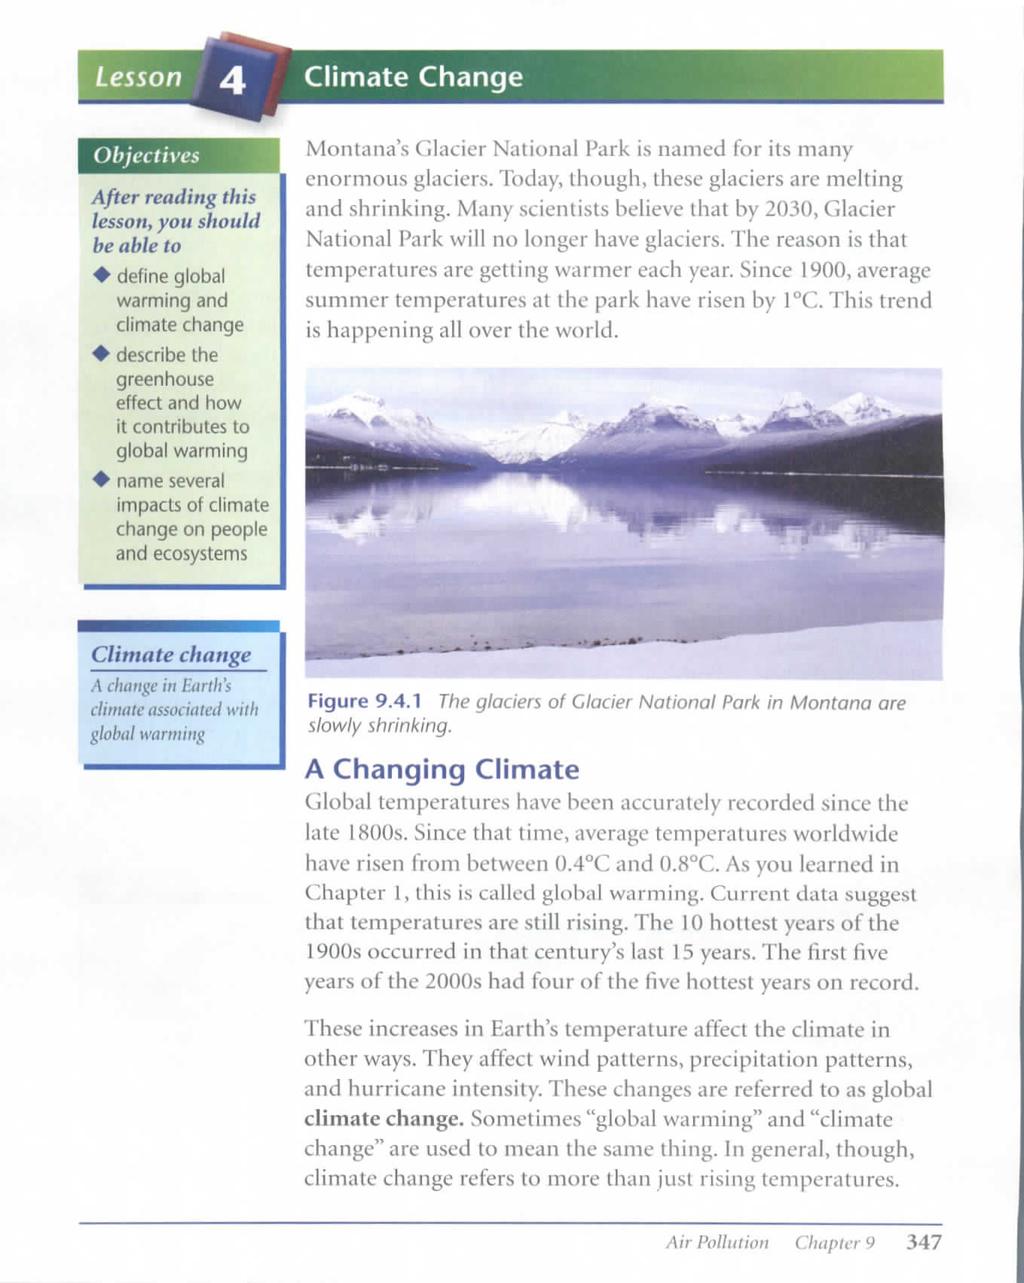 Lesson Objectives After reading this lesson, you should be able to + define global warming and climate change ^ describe the greenhouse effect and how it contributes to global warming + name several